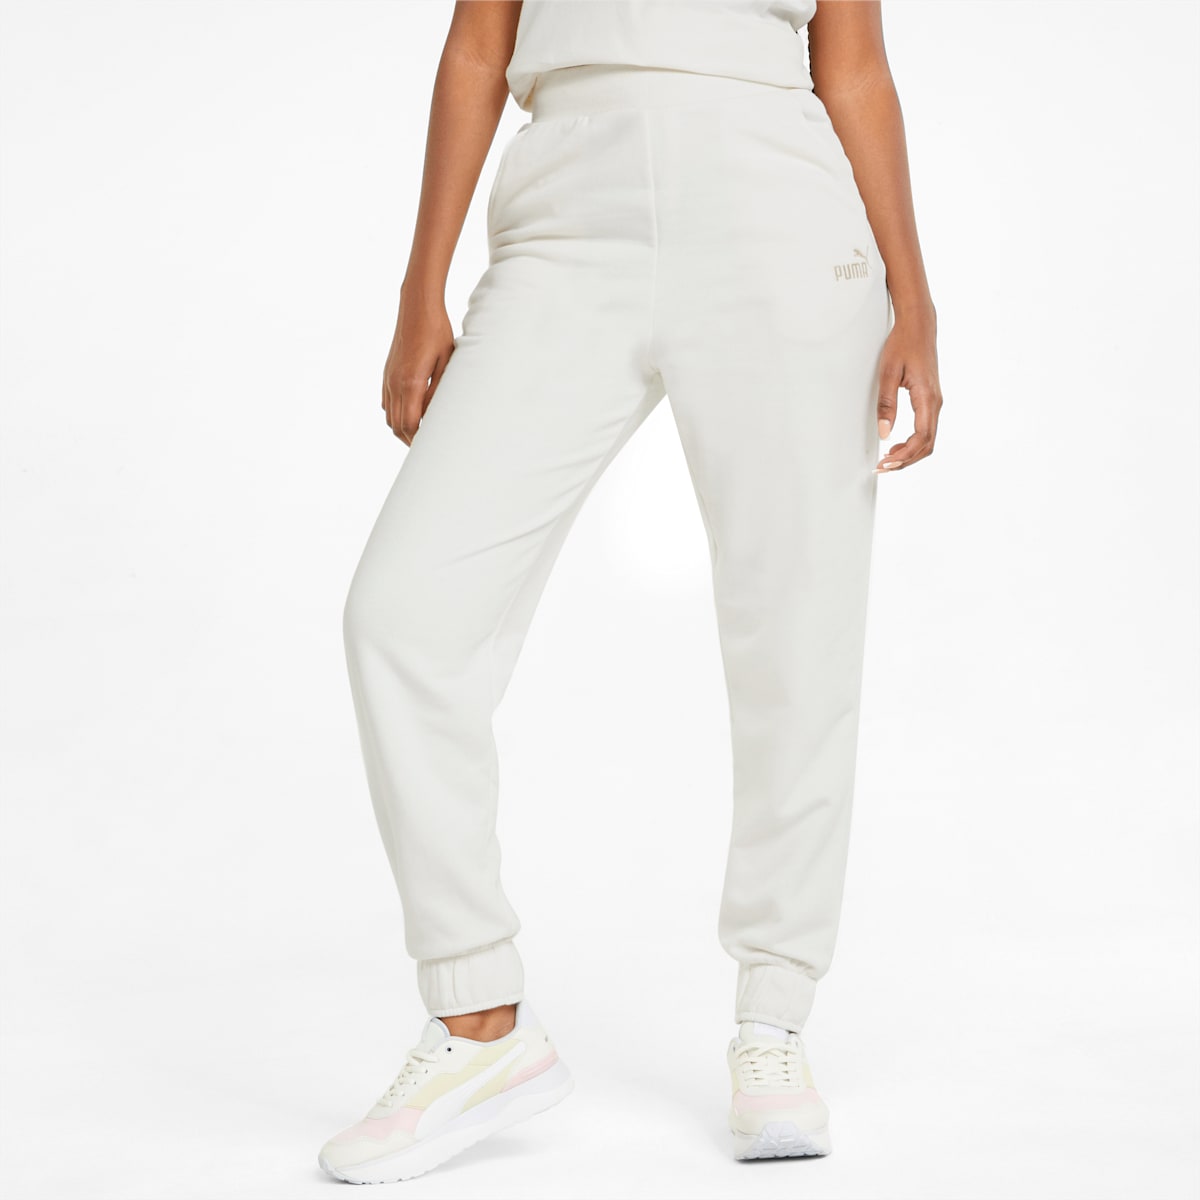 Essentials+ Embroidery Women's Pants